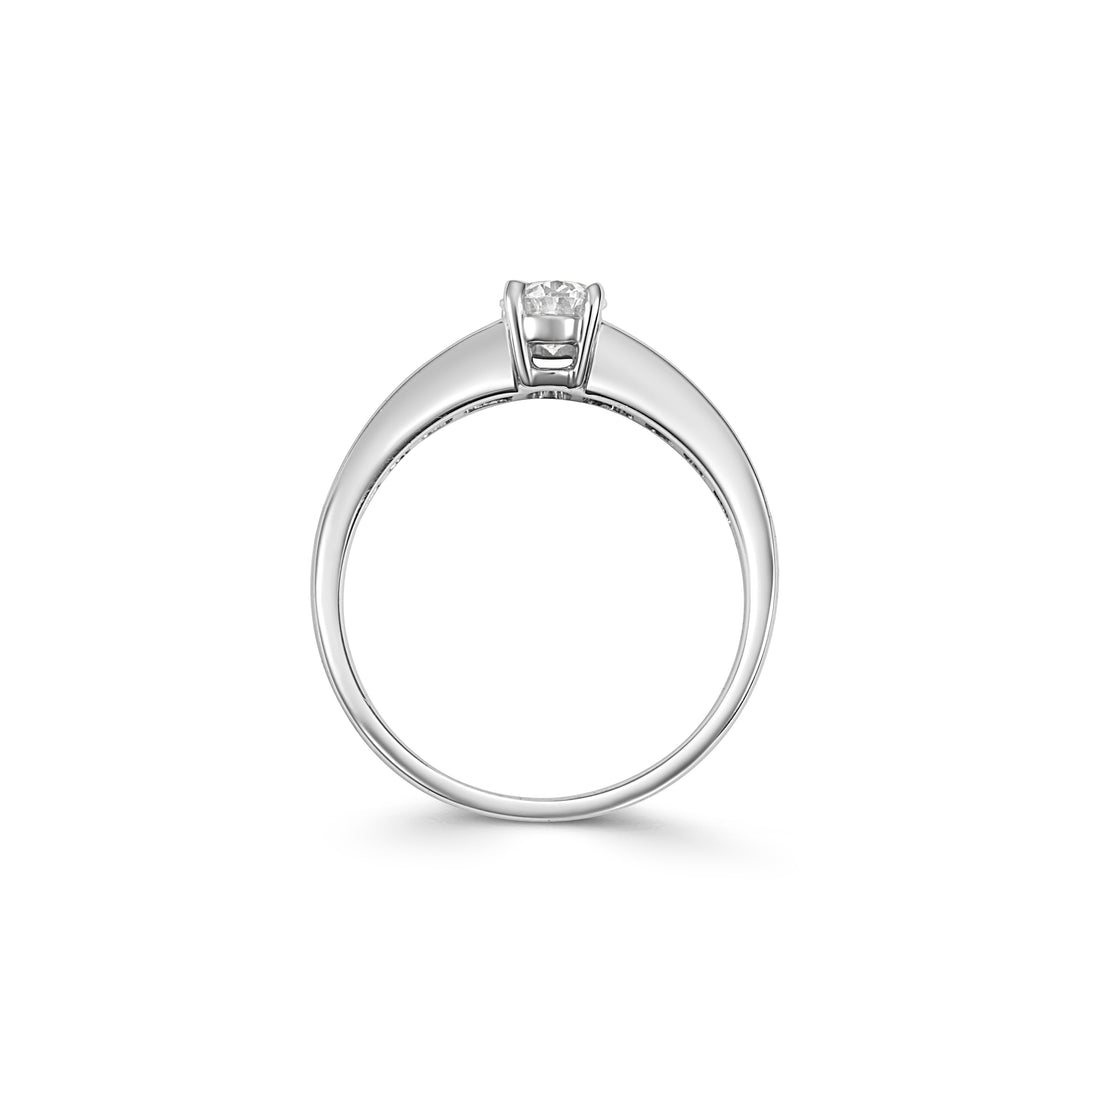 18ct White Gold Oval and Baguette Diamond Ring - Robert Anthony Jewellers, Edinburgh